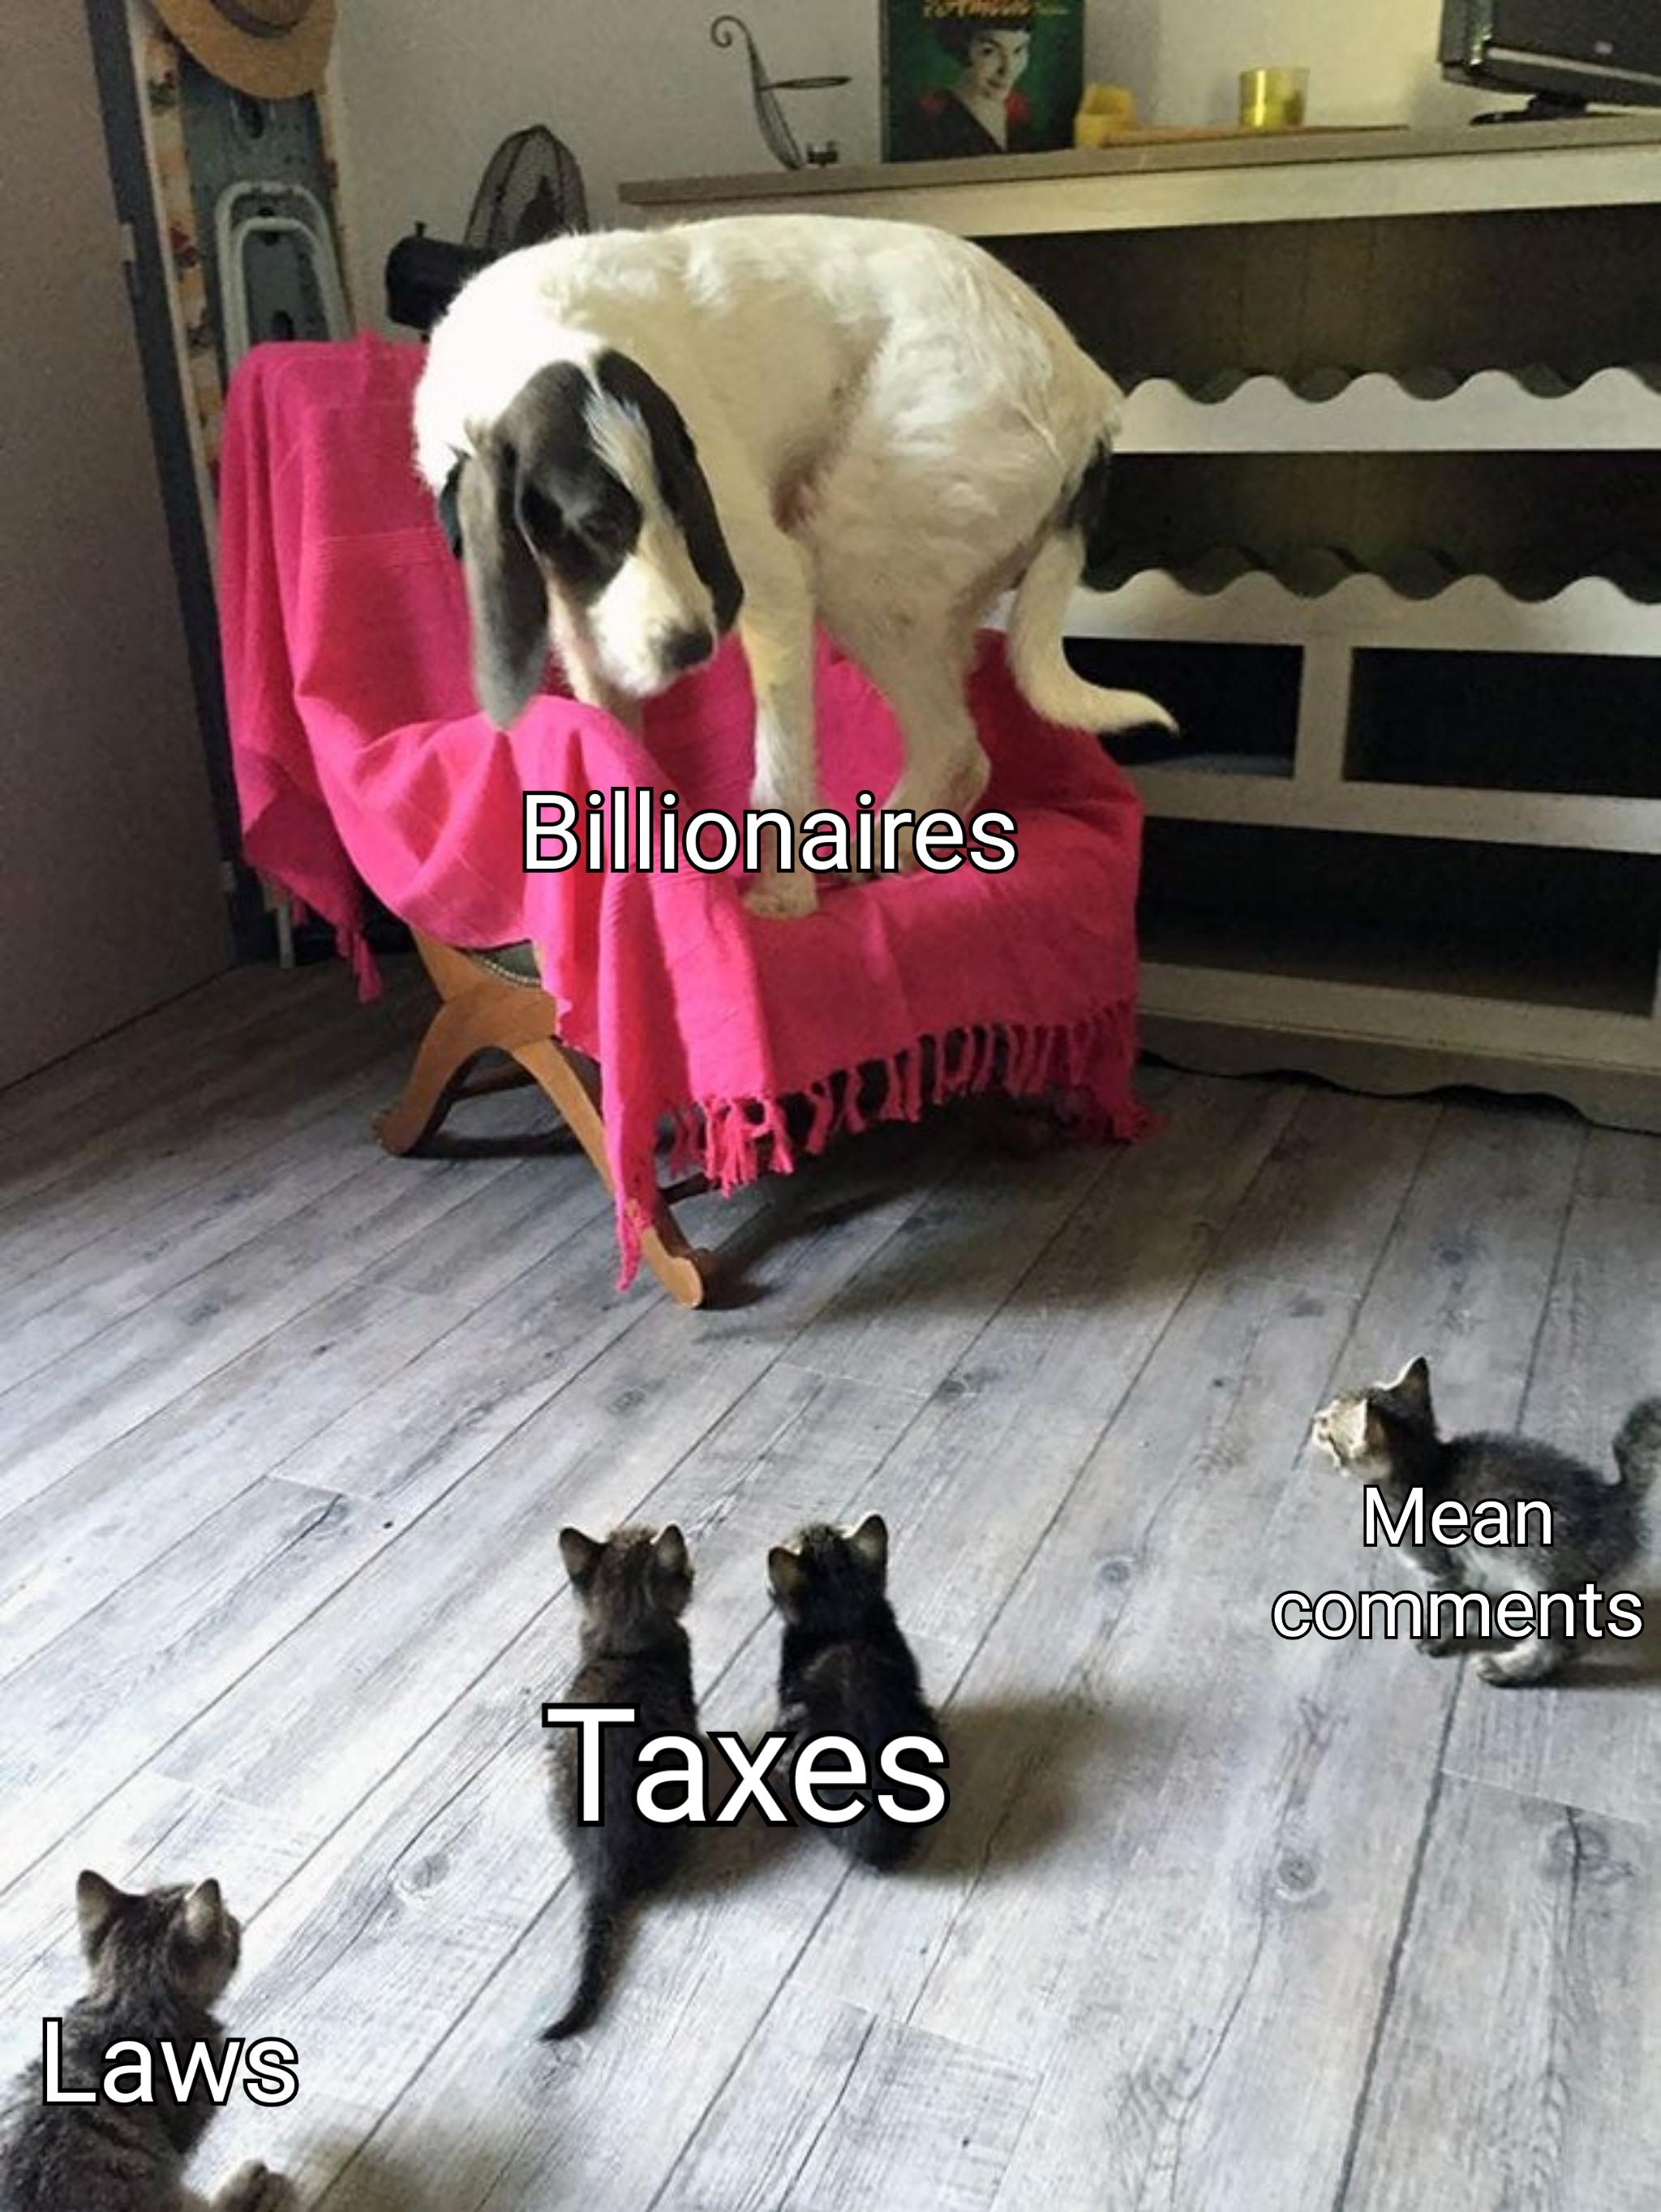 dog scared of cats - Billionaires AX200 Mean Taxes Laws